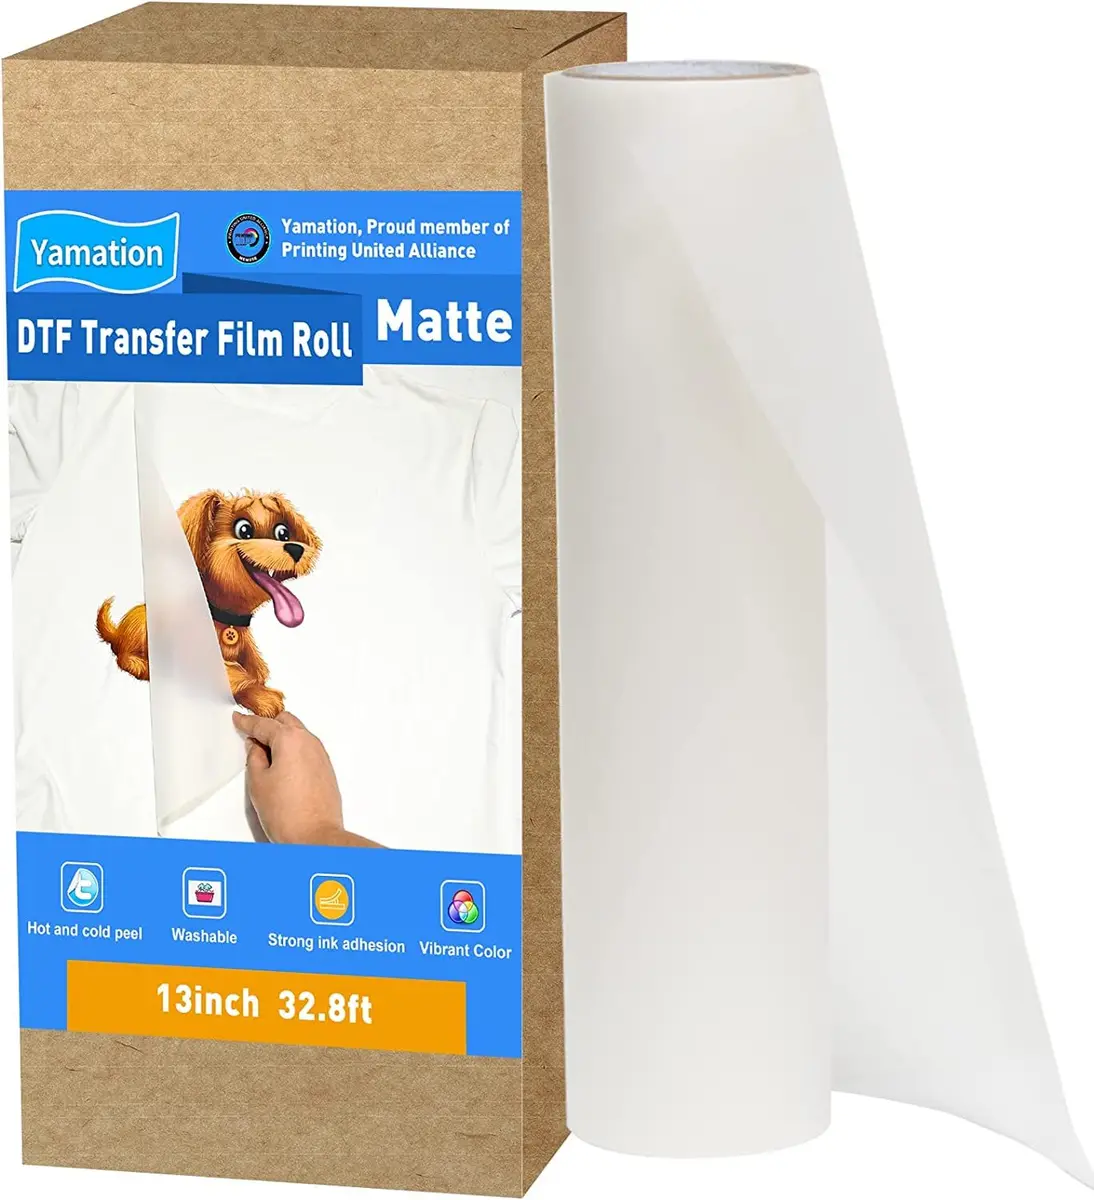 Yamation DTF Transfer Film Roll: 13inch 32.8ft Sheets Premium